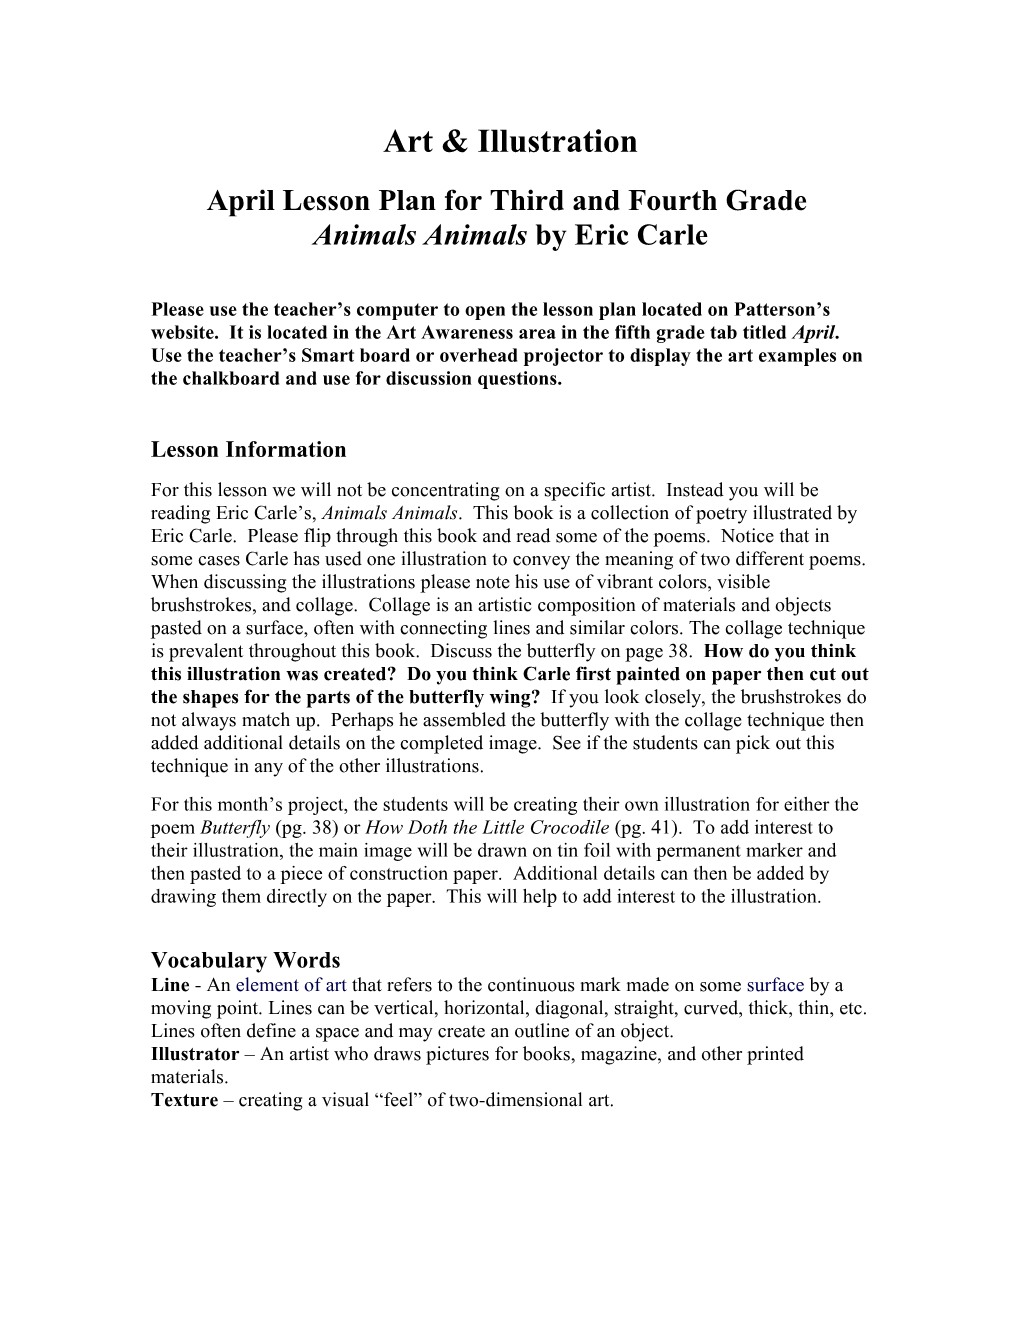 April Lesson Plan for Third and Fourth Grade